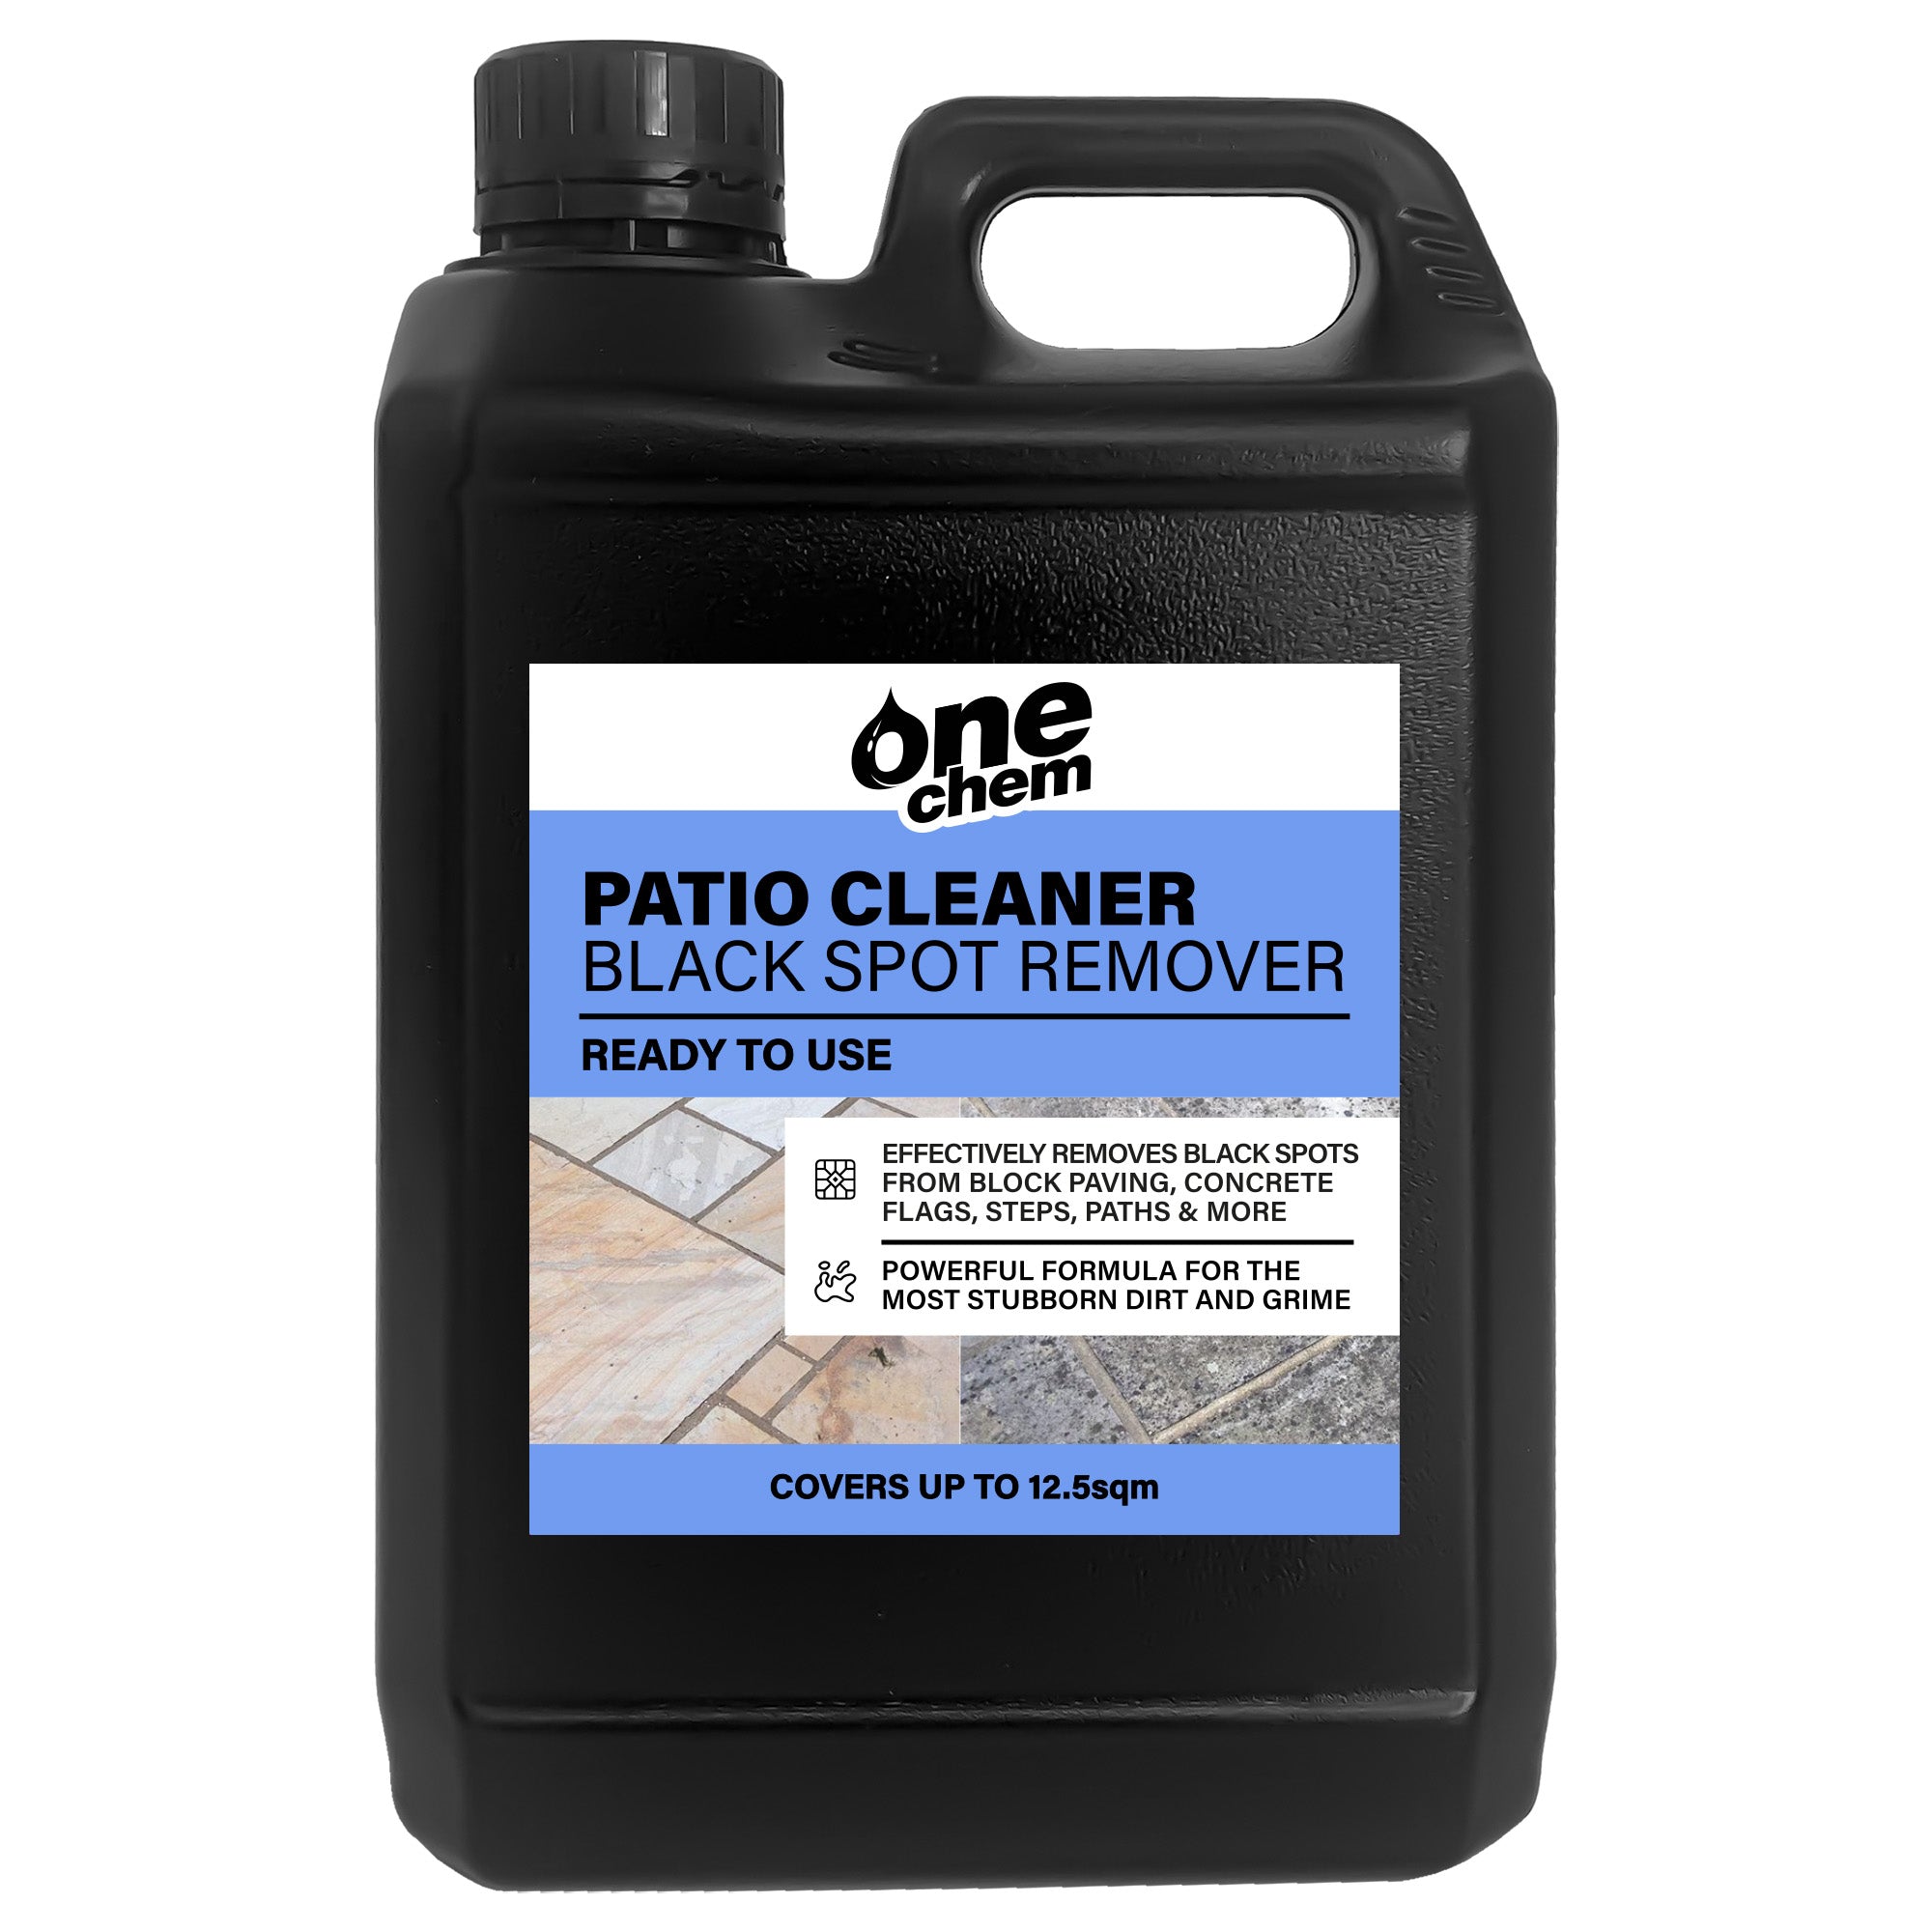 One Chem - Black Spot Remover - 2 x 2.5L - Ready to Use Patio Cleaner